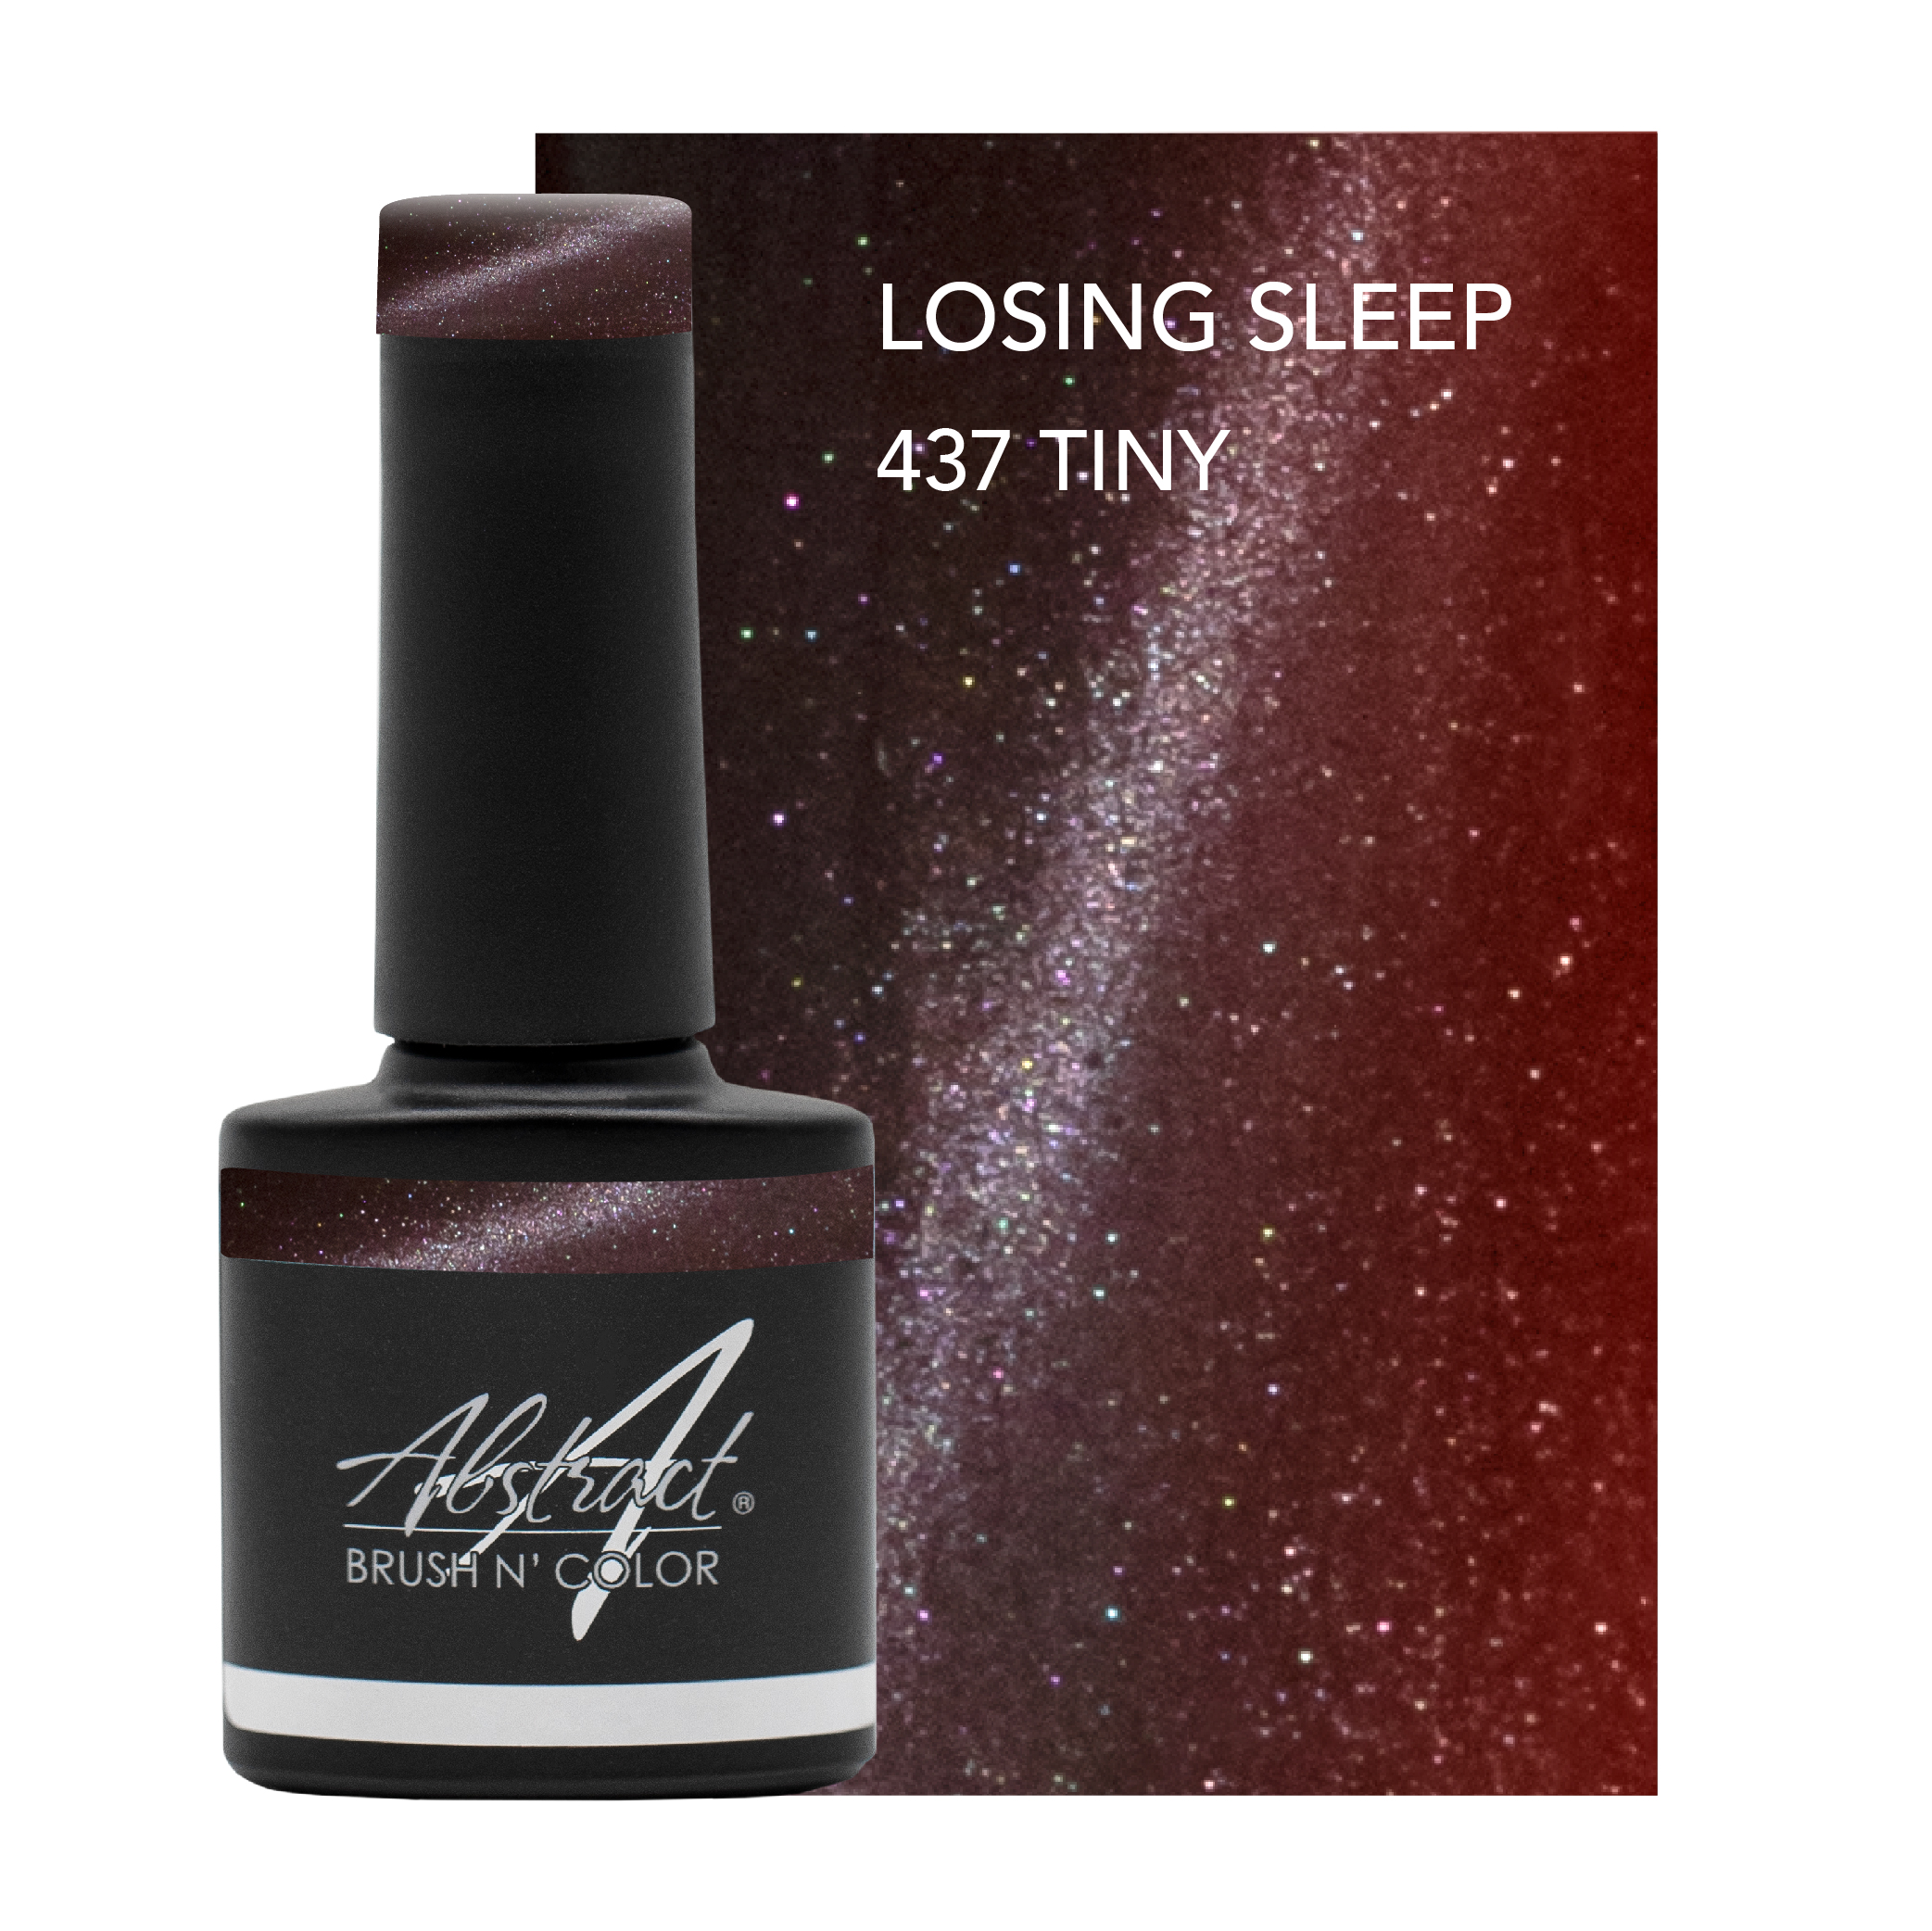 437T* Losing Sleep 7,5ml (Love @ First Sight), Abstract | 250195